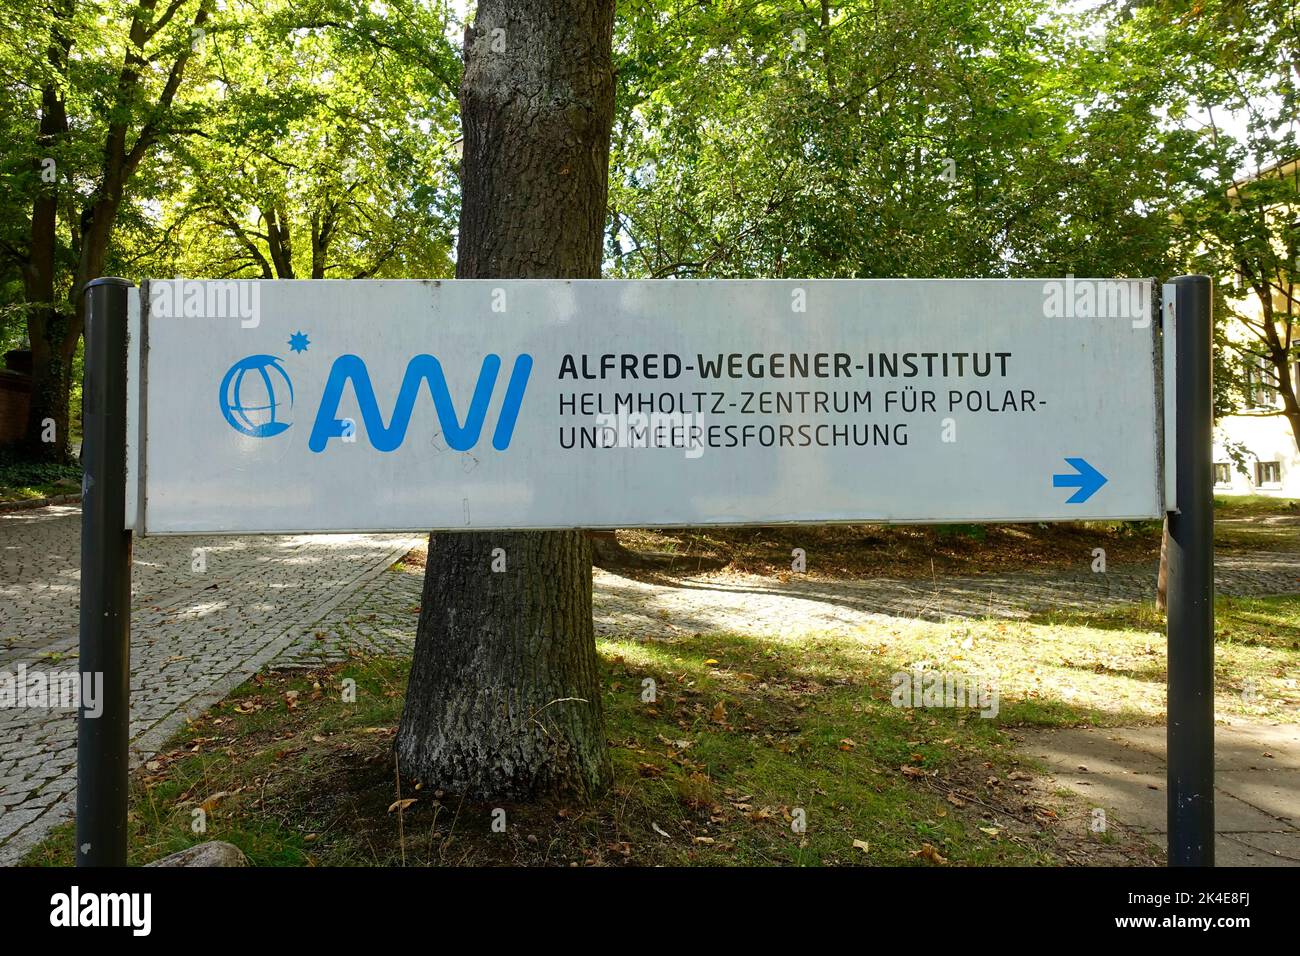 AWI, Alfred Wegener Institute, Helmholtz Centre for Polar and Marine Research Foto Stock